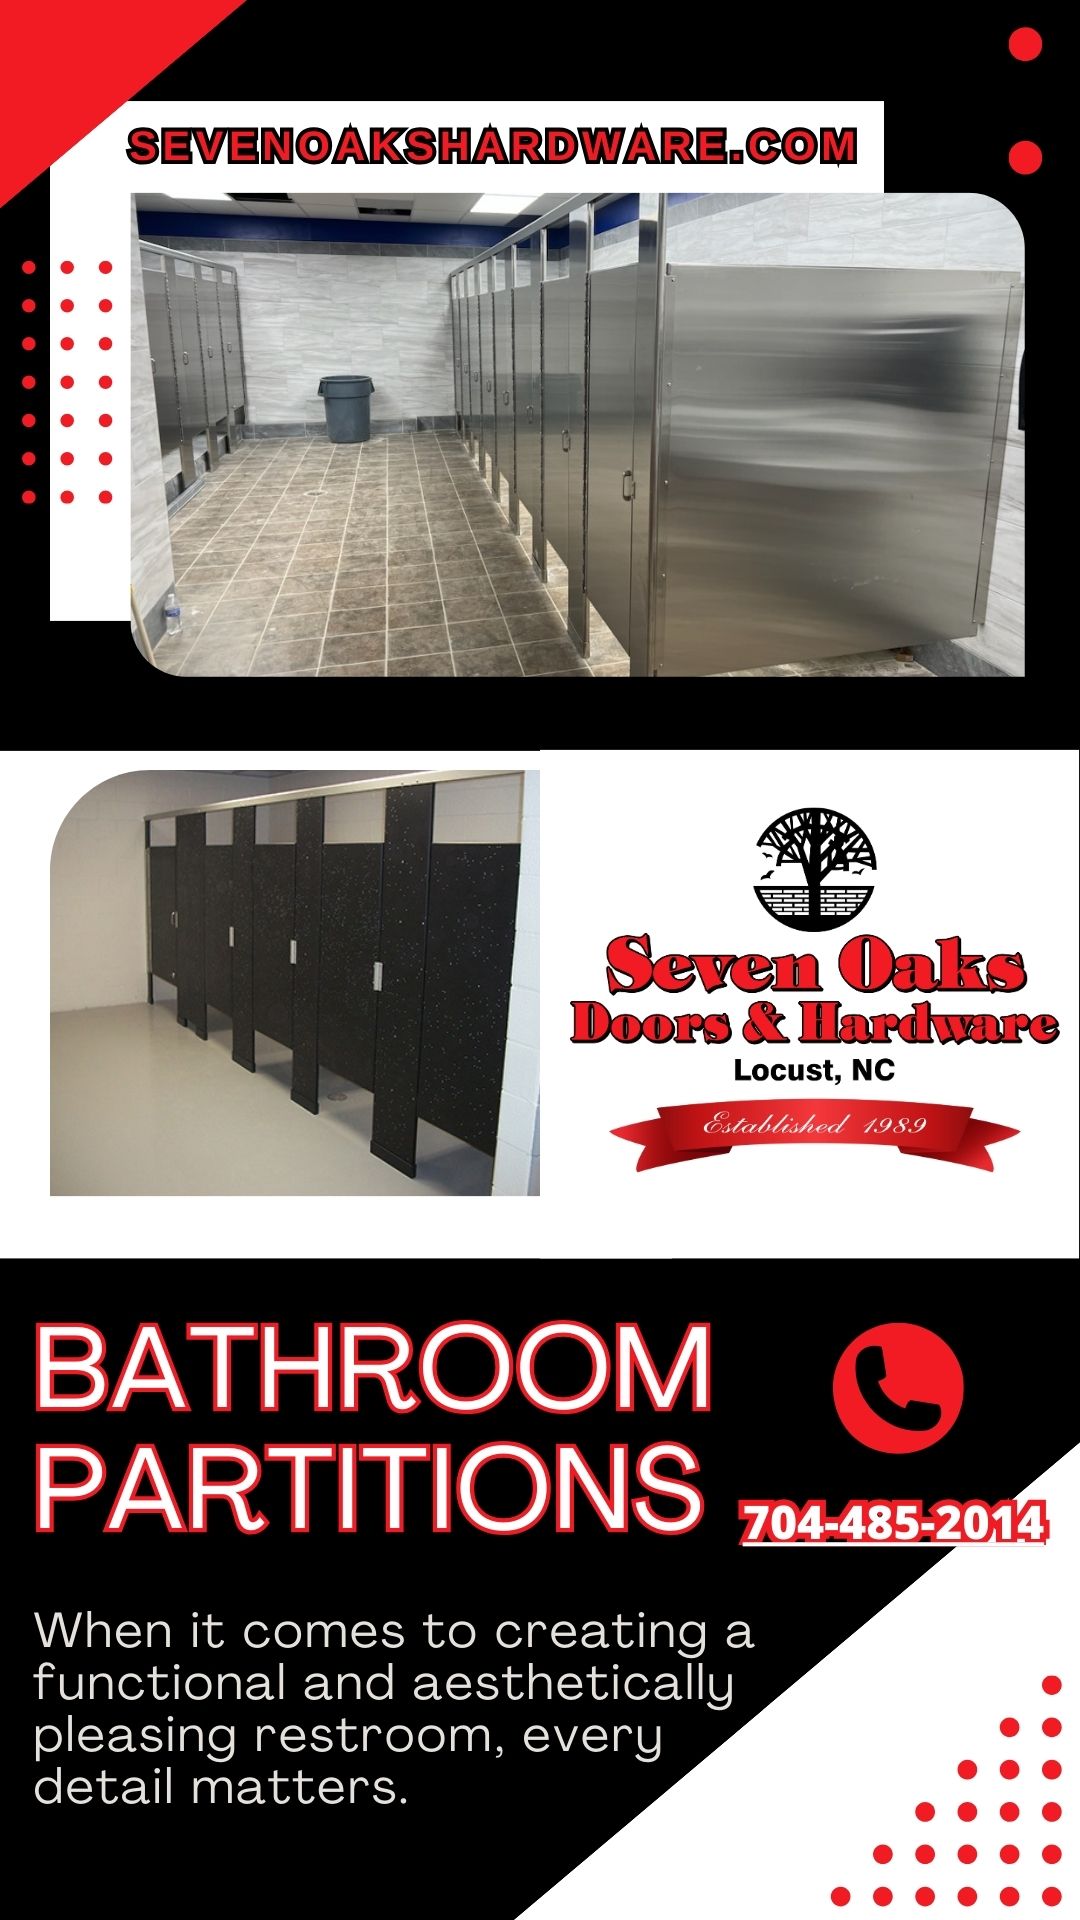 Update Your Commercial Restroom with Premium Bathroom Partitions